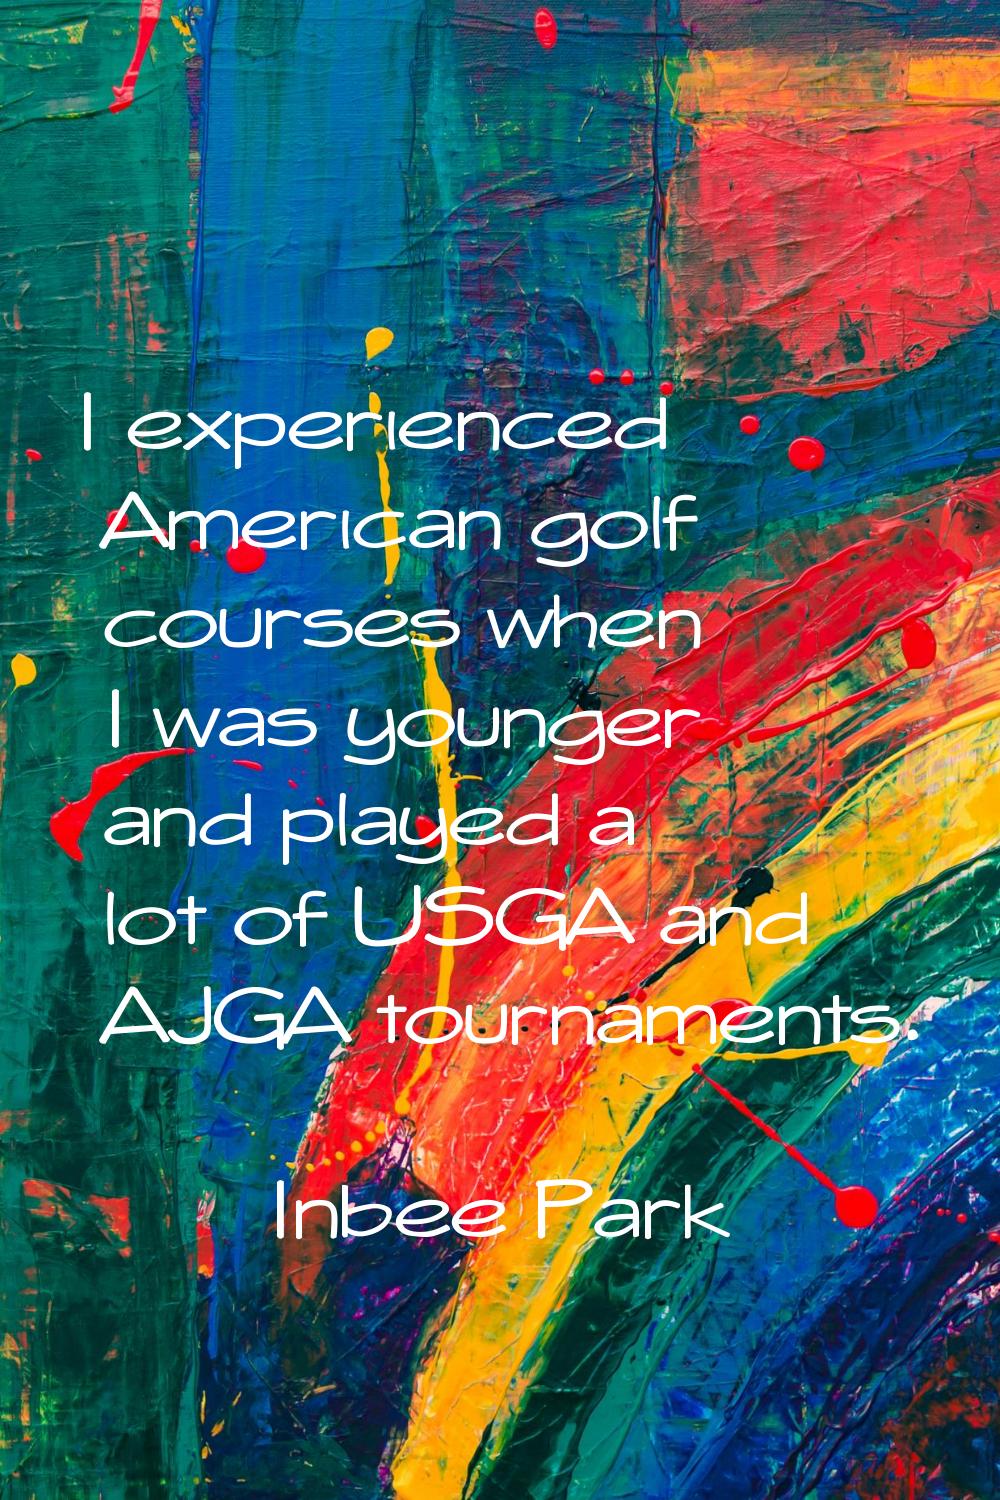 I experienced American golf courses when I was younger and played a lot of USGA and AJGA tournament